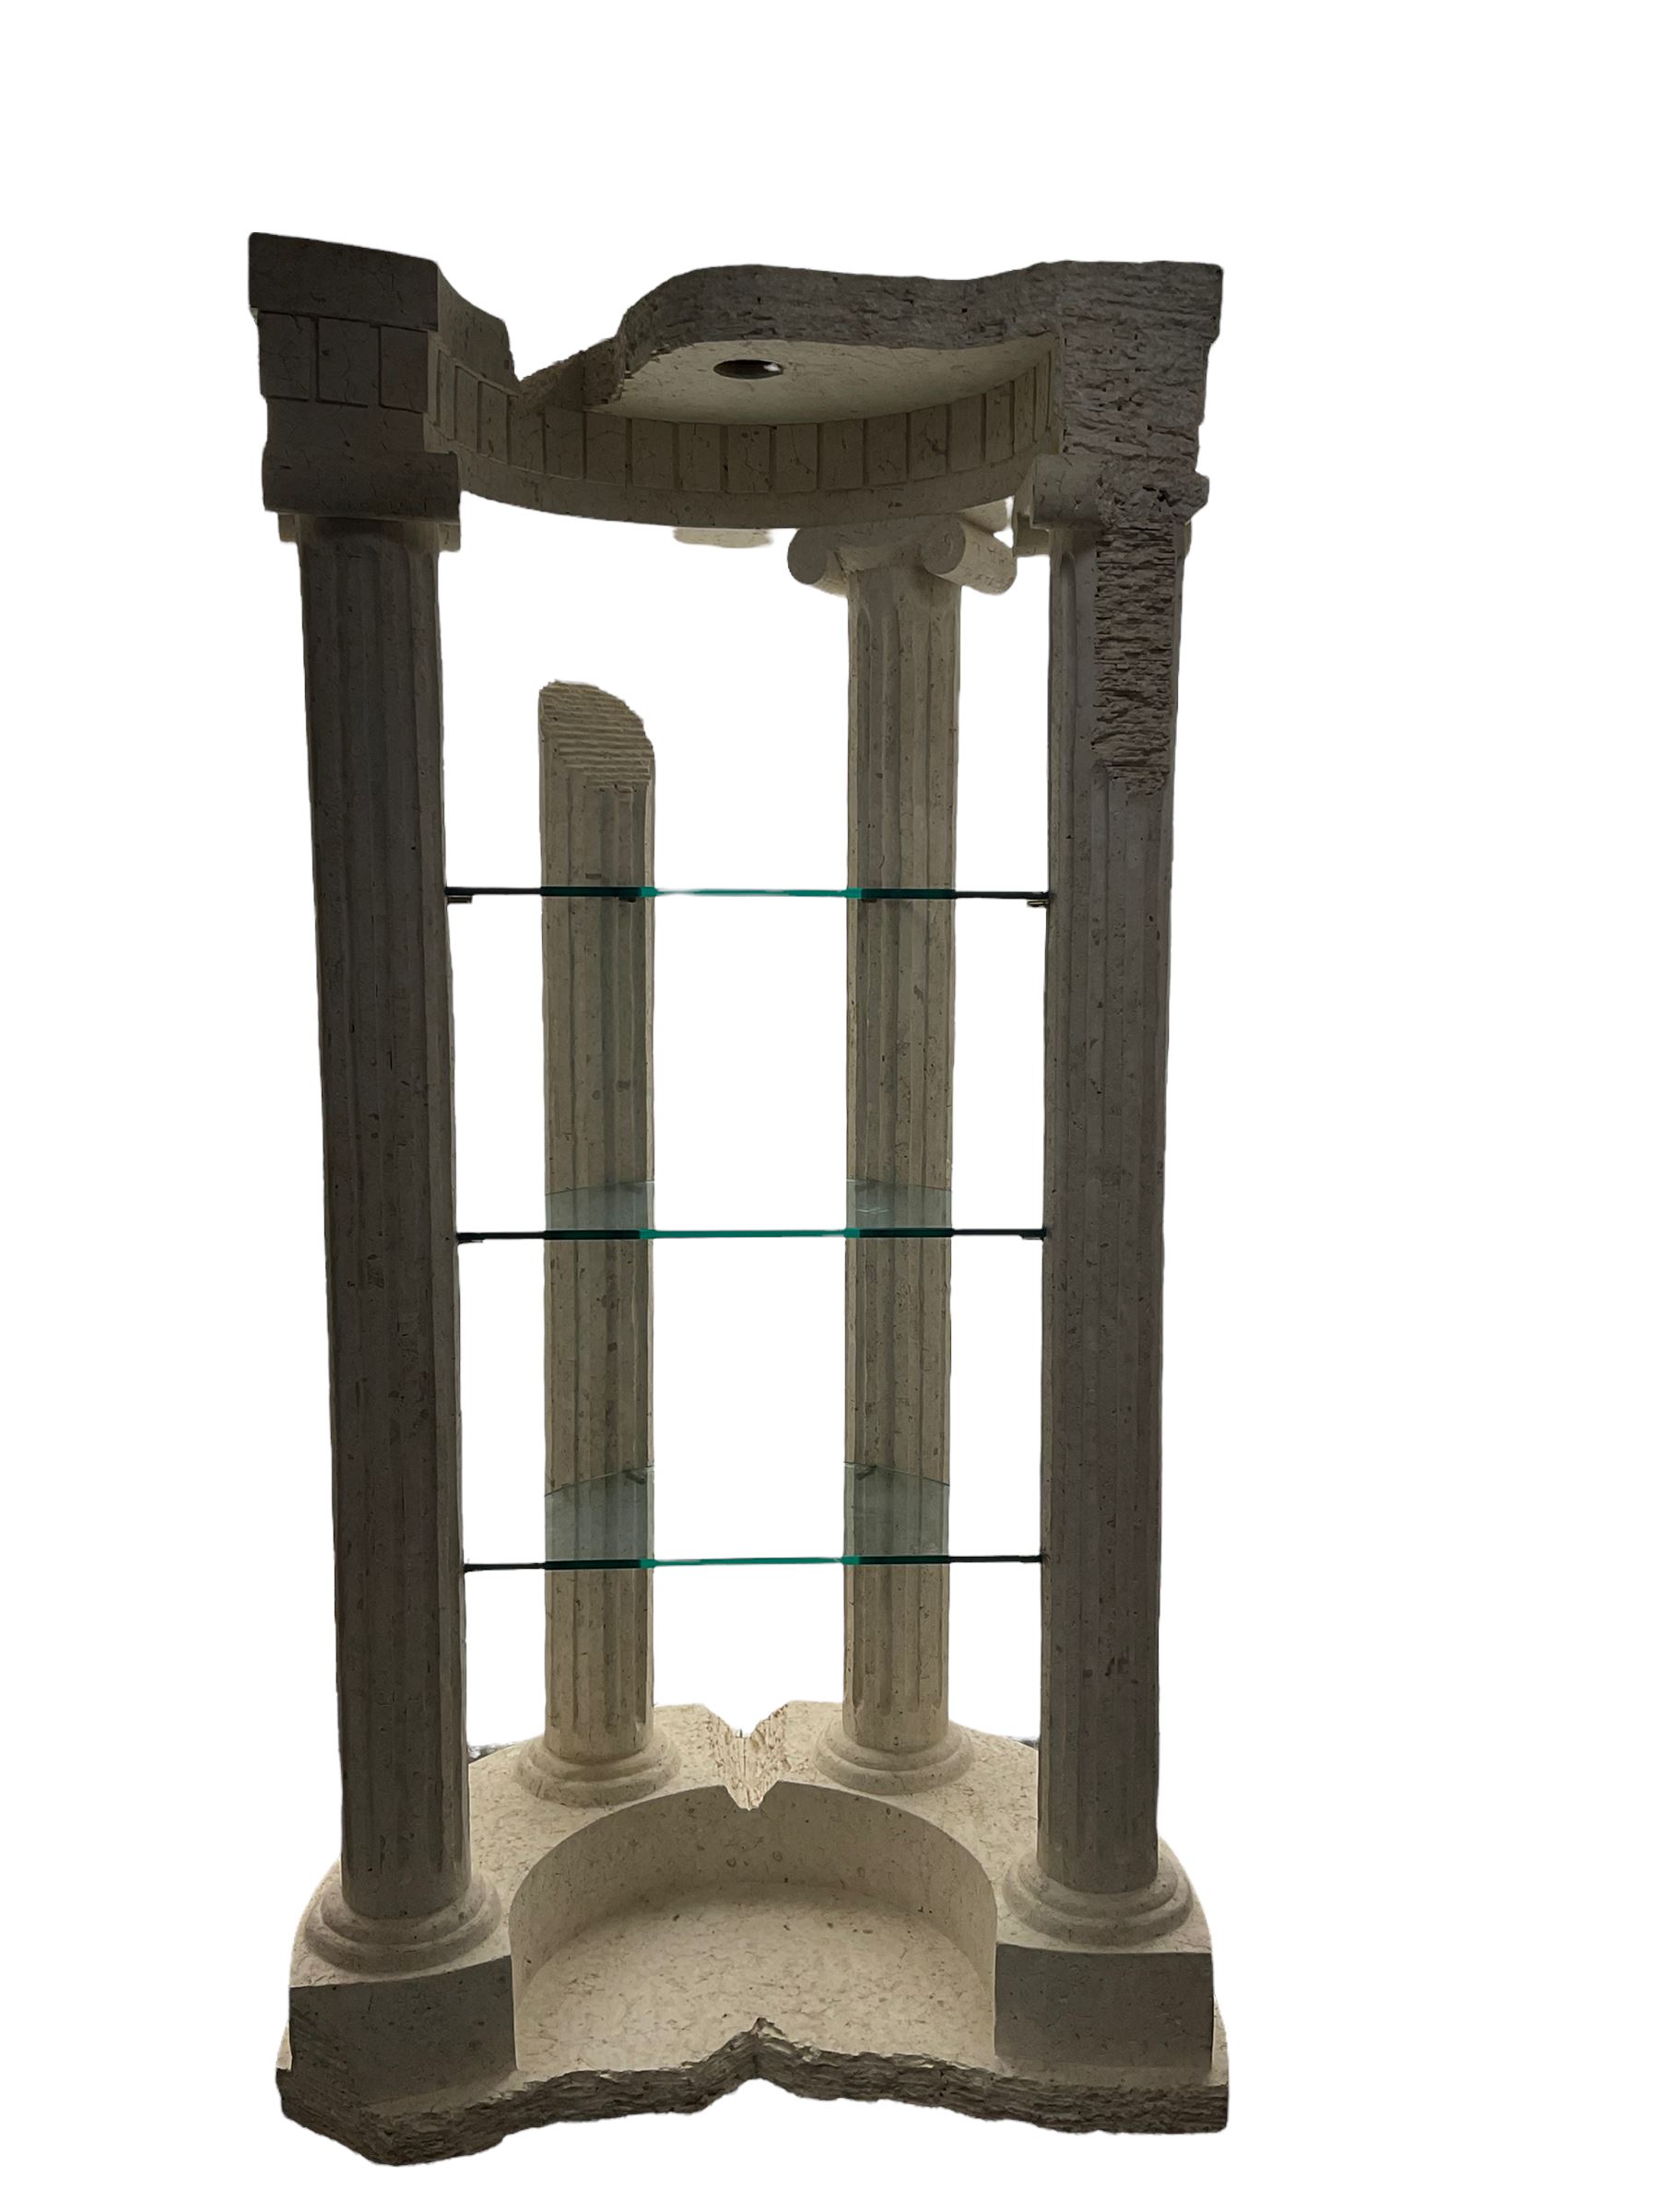 Cast architectural stone effect column display stand - Image 6 of 6